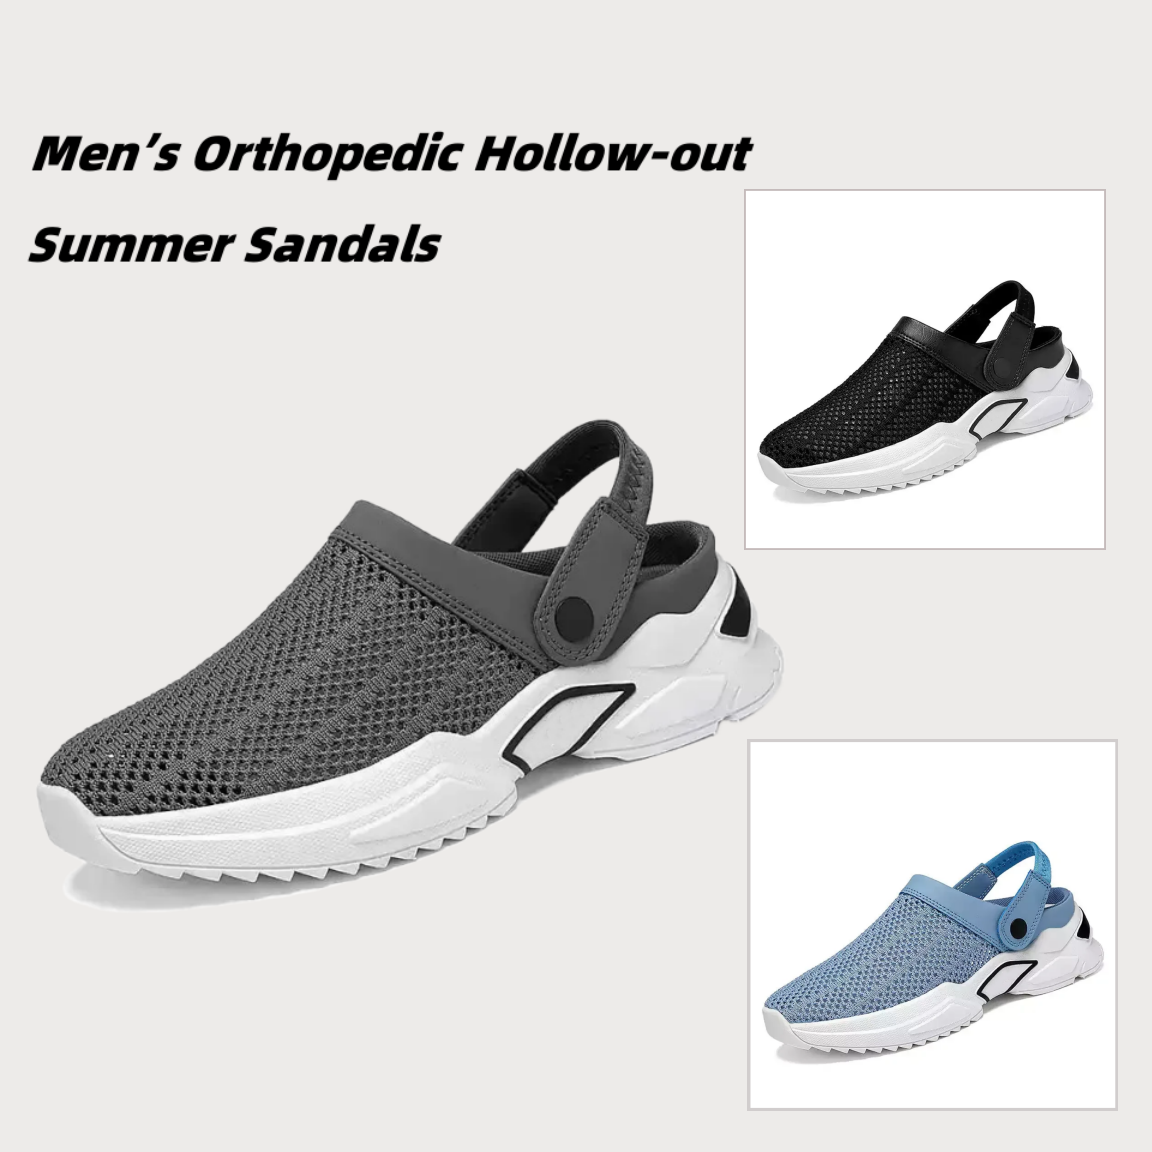 Men's Orthopedic Hollow-out Summer Sandals